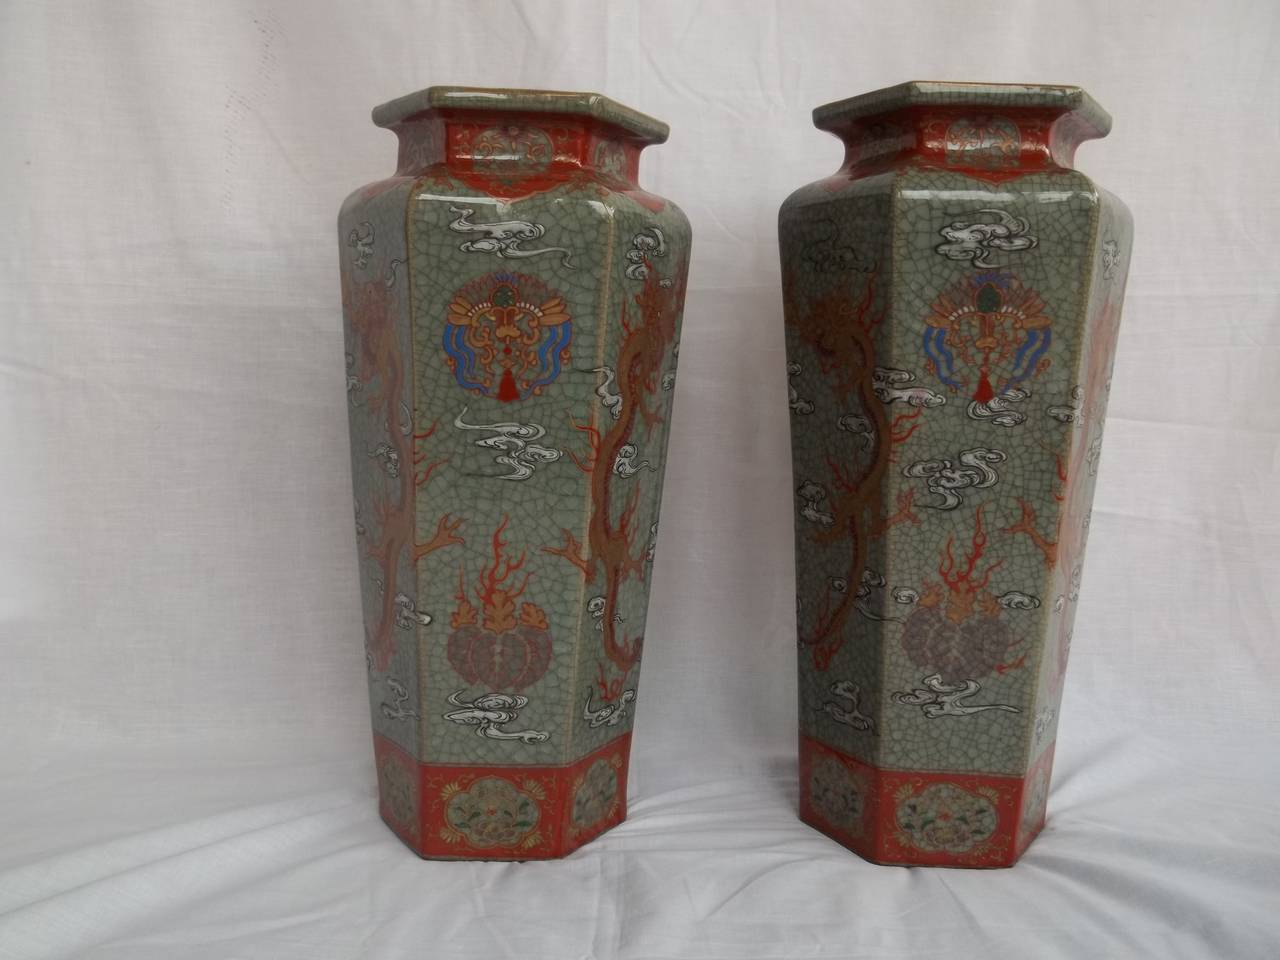 These are a PAIR of very beautiful, decorative Chinese porcelain Vases hand painted with dragons, that we date to the late Qing period, circa 1900.

The vases are hexagonal in section, tapering towards the base, with a high neck and have a celadon,